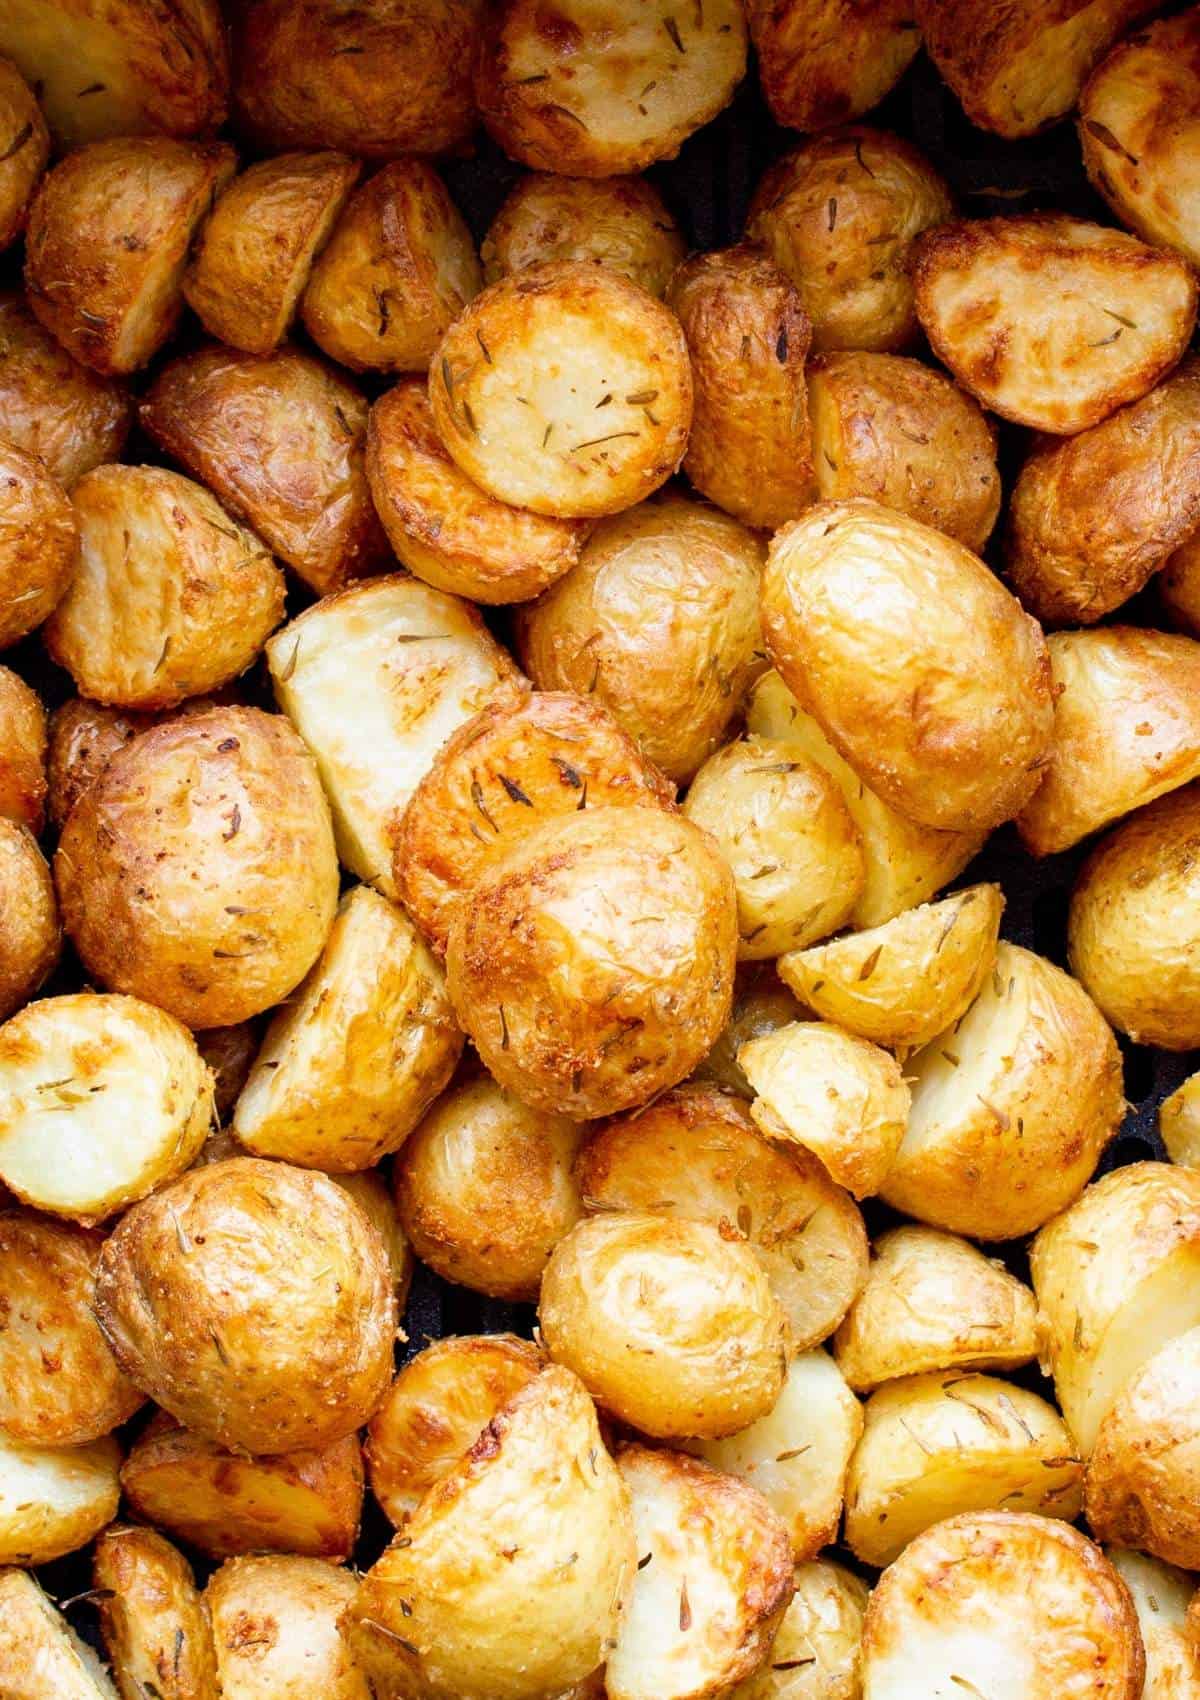 Close up of golden browned new potatoes baked in air fryer after cooking.